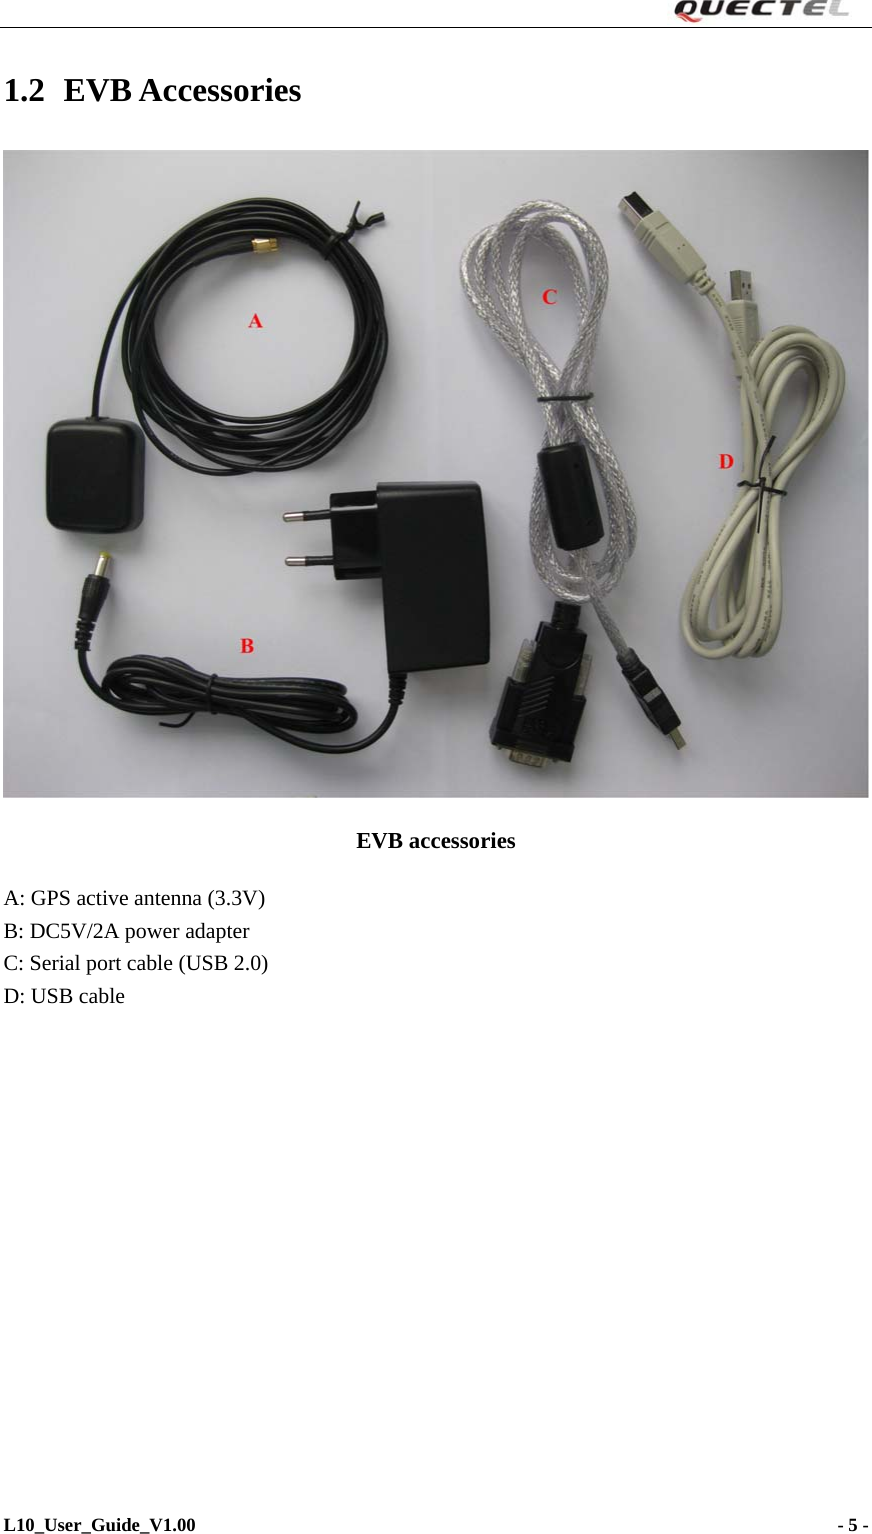                                                                     1.2 EVB Accessories  EVB accessories A: GPS active antenna (3.3V) B: DC5V/2A power adapter C: Serial port cable (USB 2.0) D: USB cableL10_User_Guide_V1.00                                                                     - 5 -   